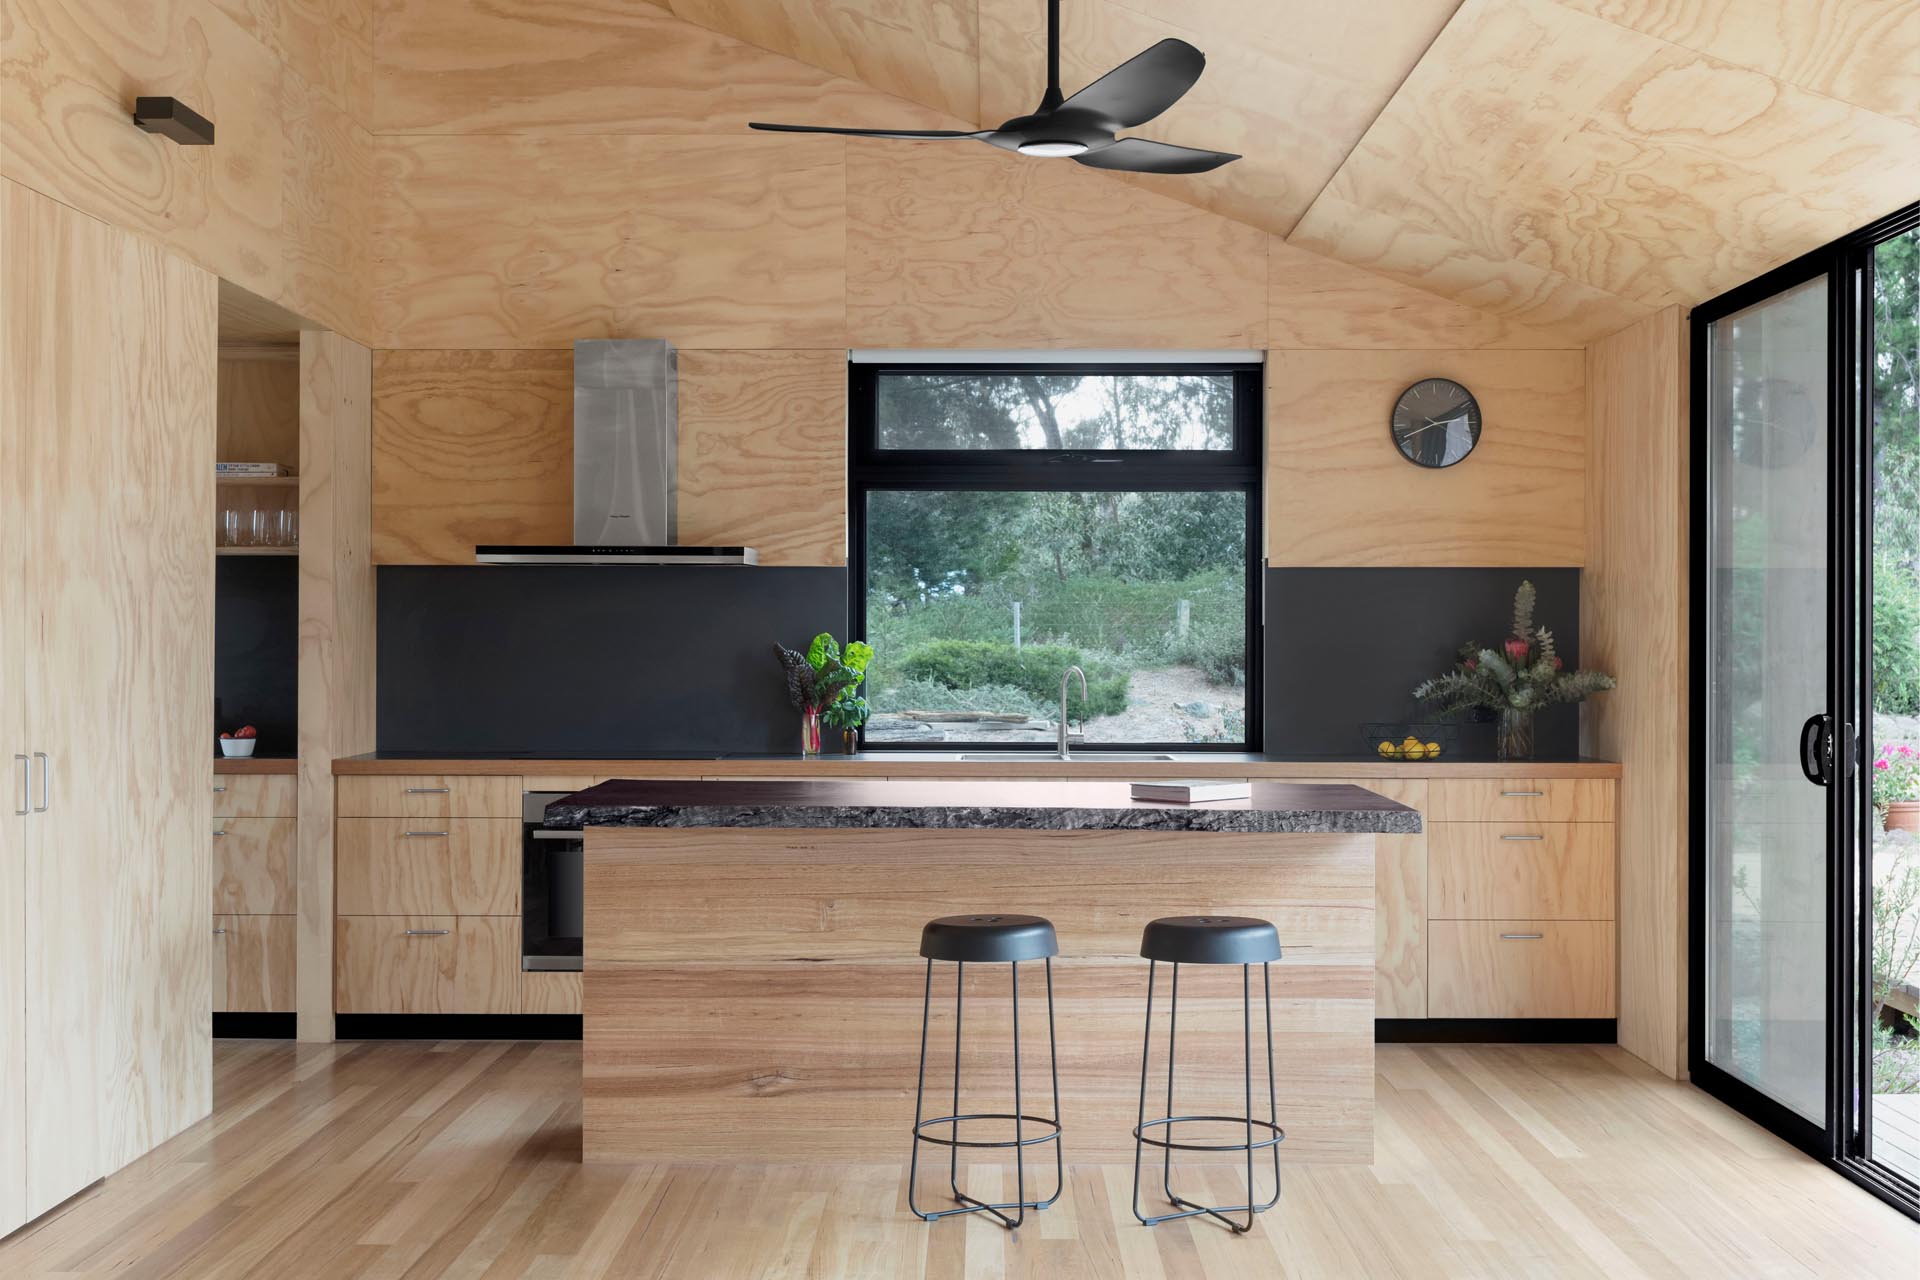 A modern plywood kitchen with a matte black countertop and backsplash.